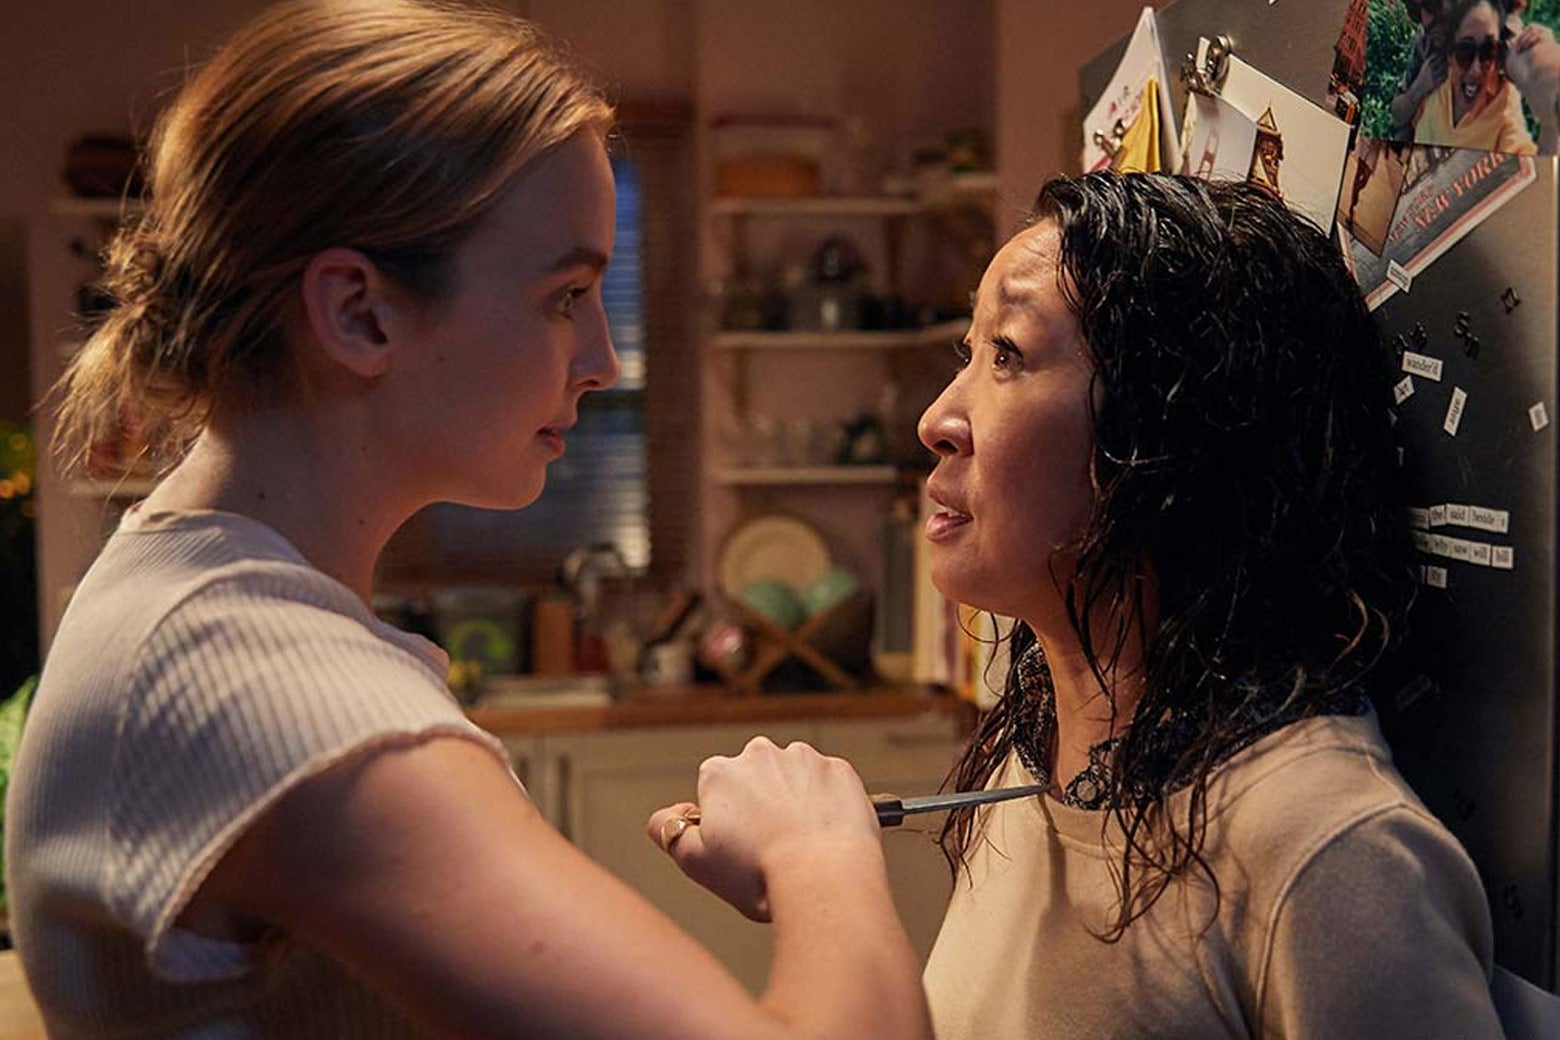 Jodie Comer holds a knife to Sandra Oh’s chest in a still from Killing Eve.